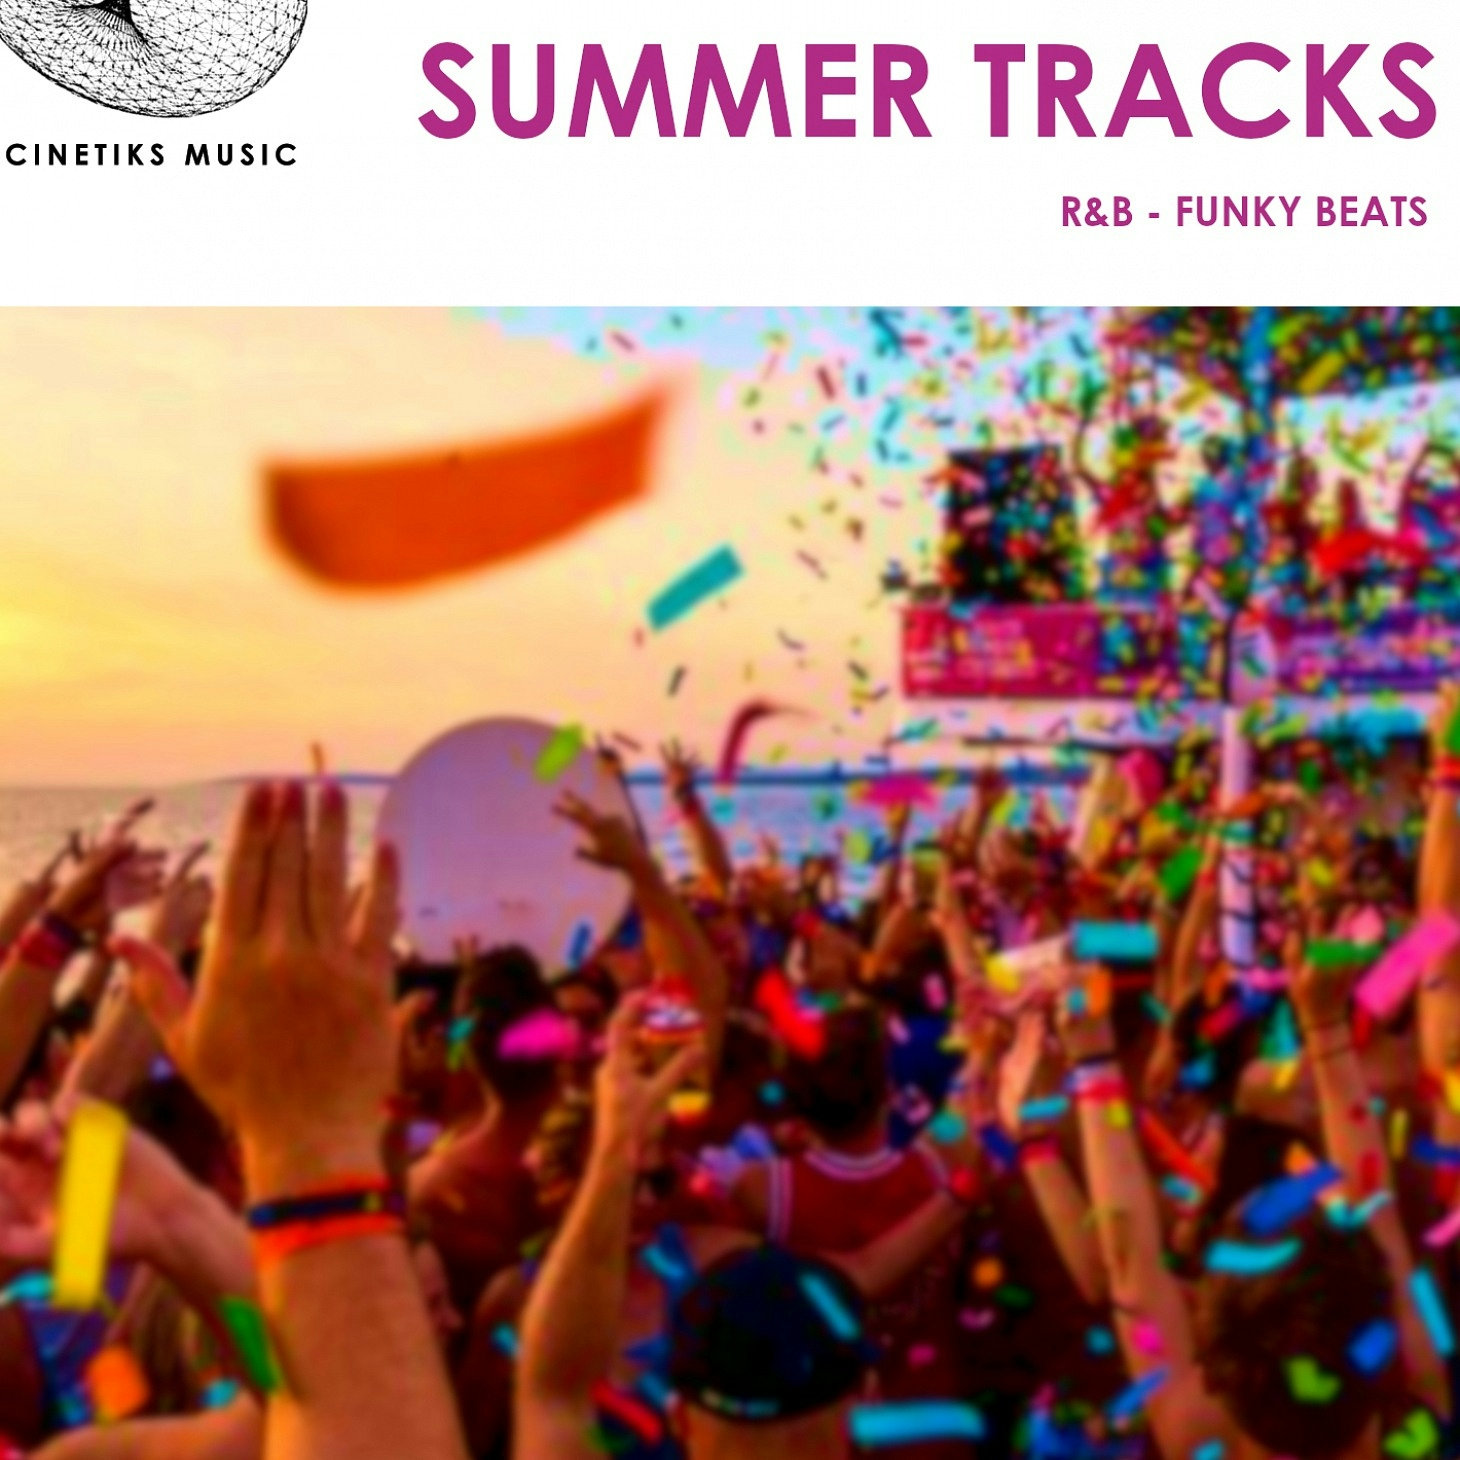  Summer Tracks - R&B and Funky Beats